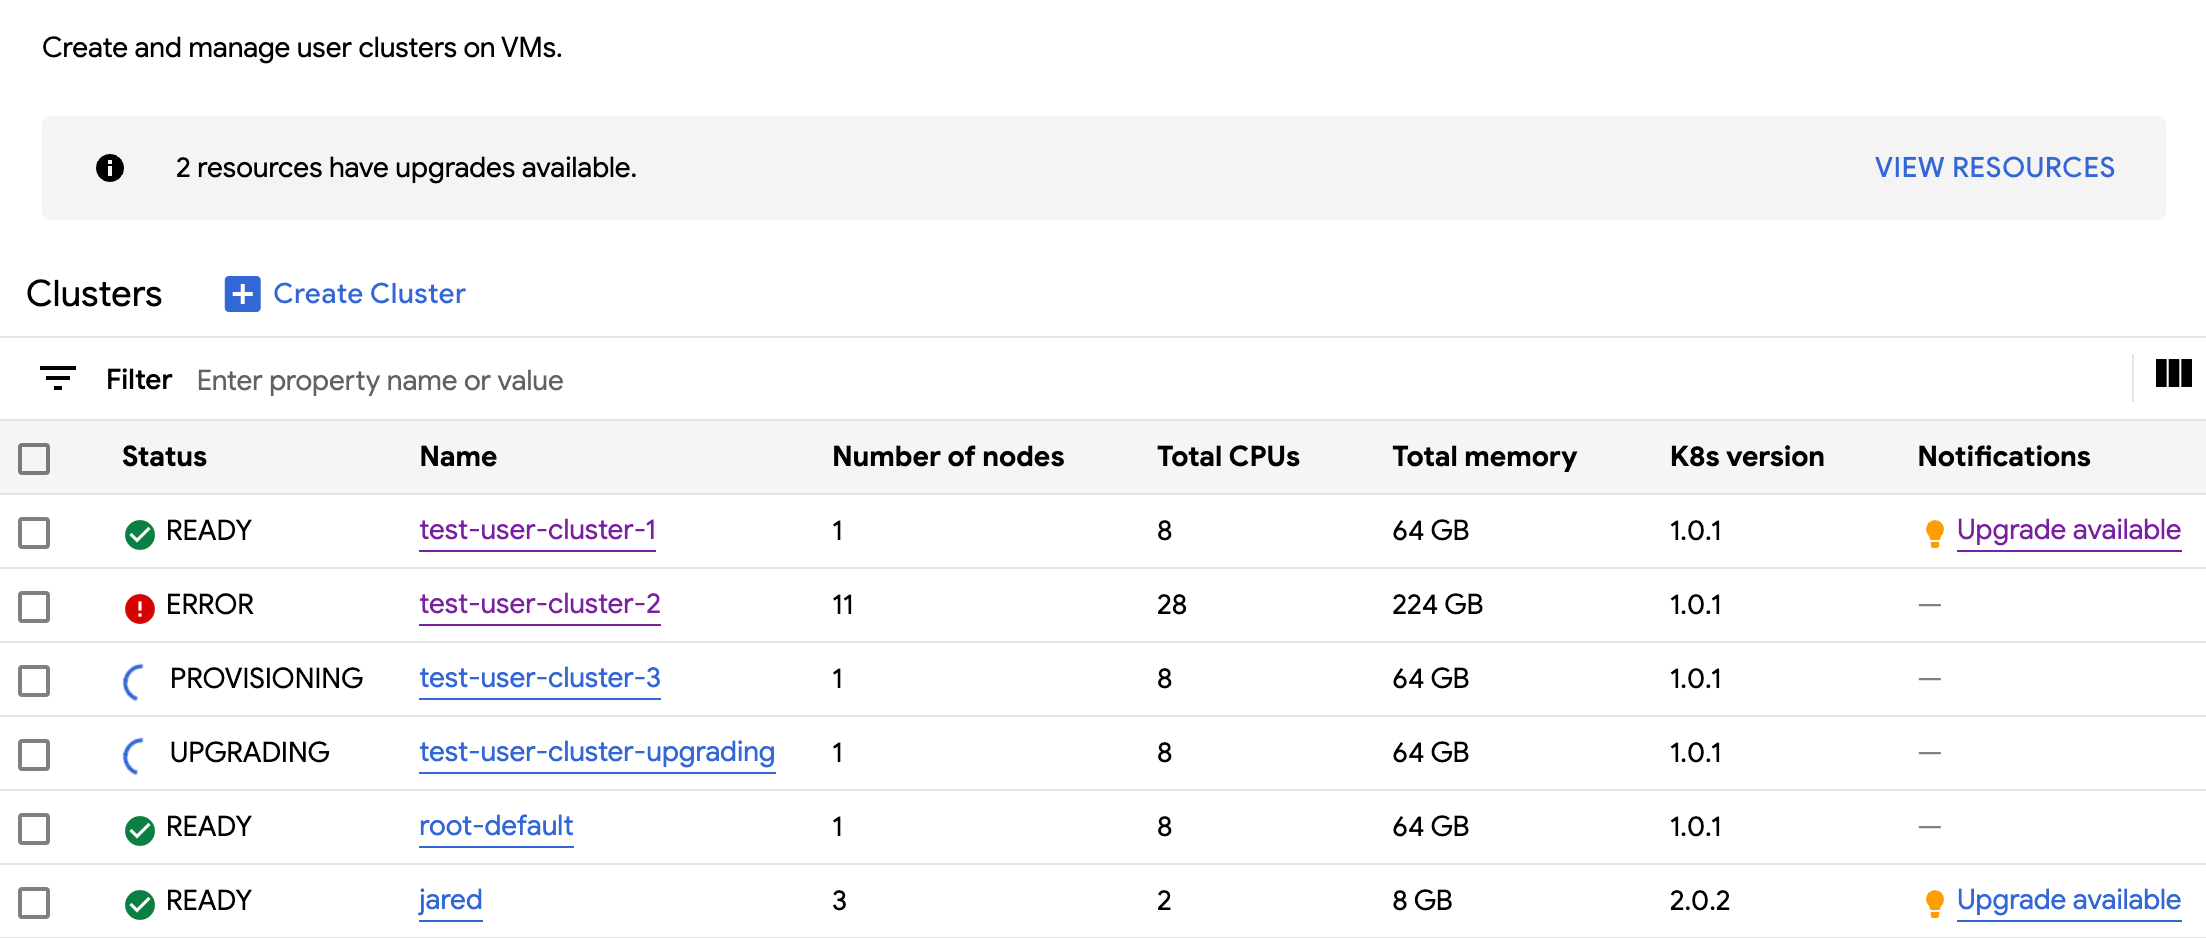 Cluster details page for statuses and other information for each Kubernetes cluster in the organization.